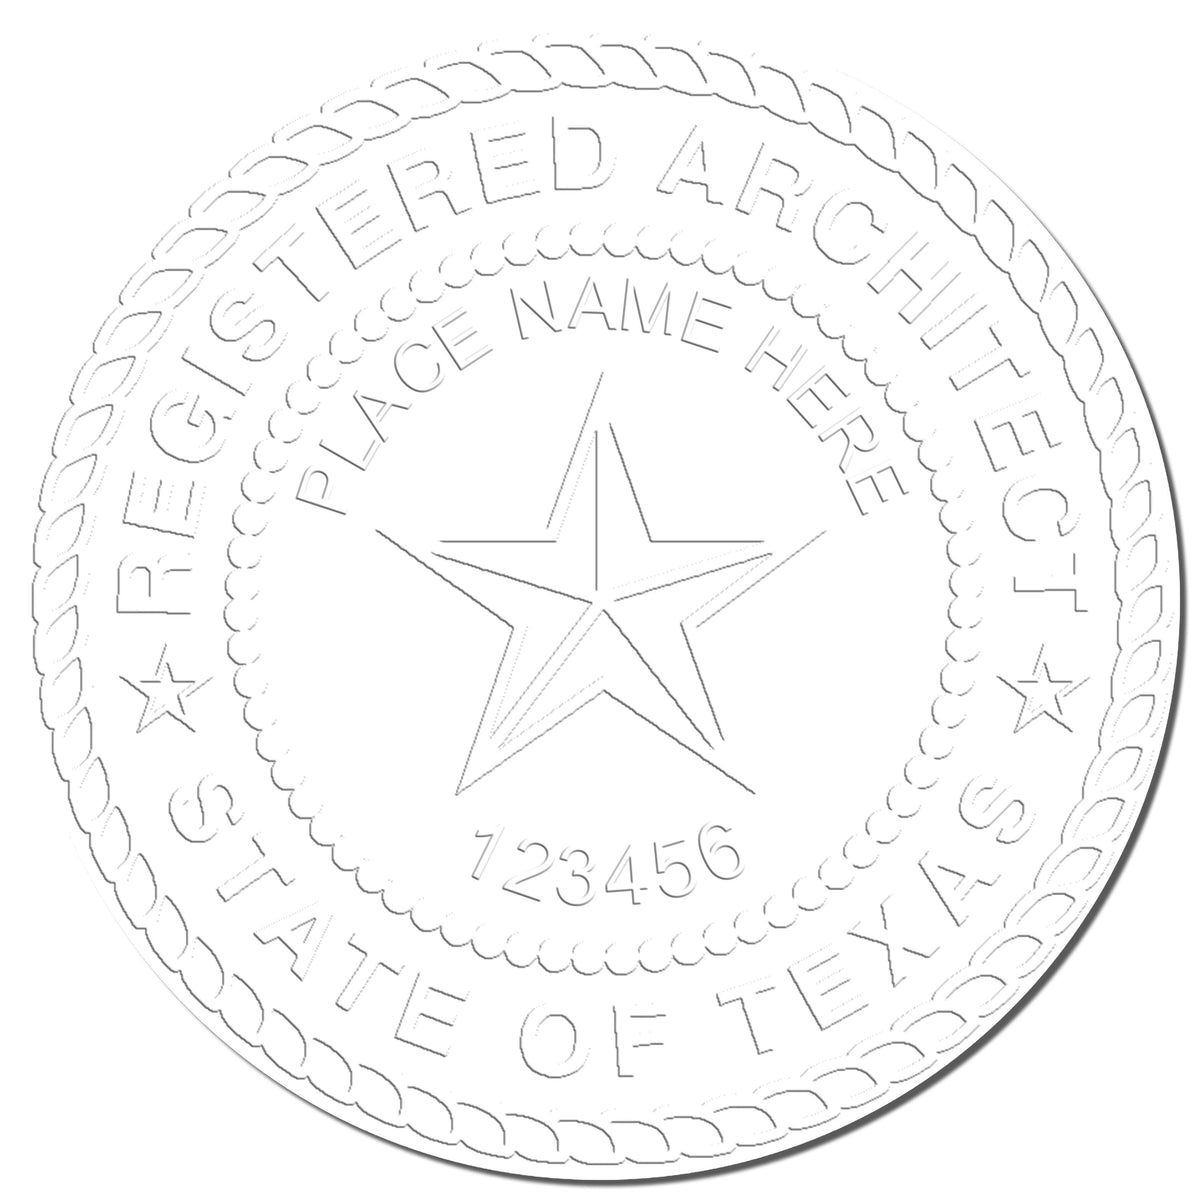 This paper is stamped with a sample imprint of the Heavy Duty Cast Iron Texas Architect Embosser, signifying its quality and reliability.